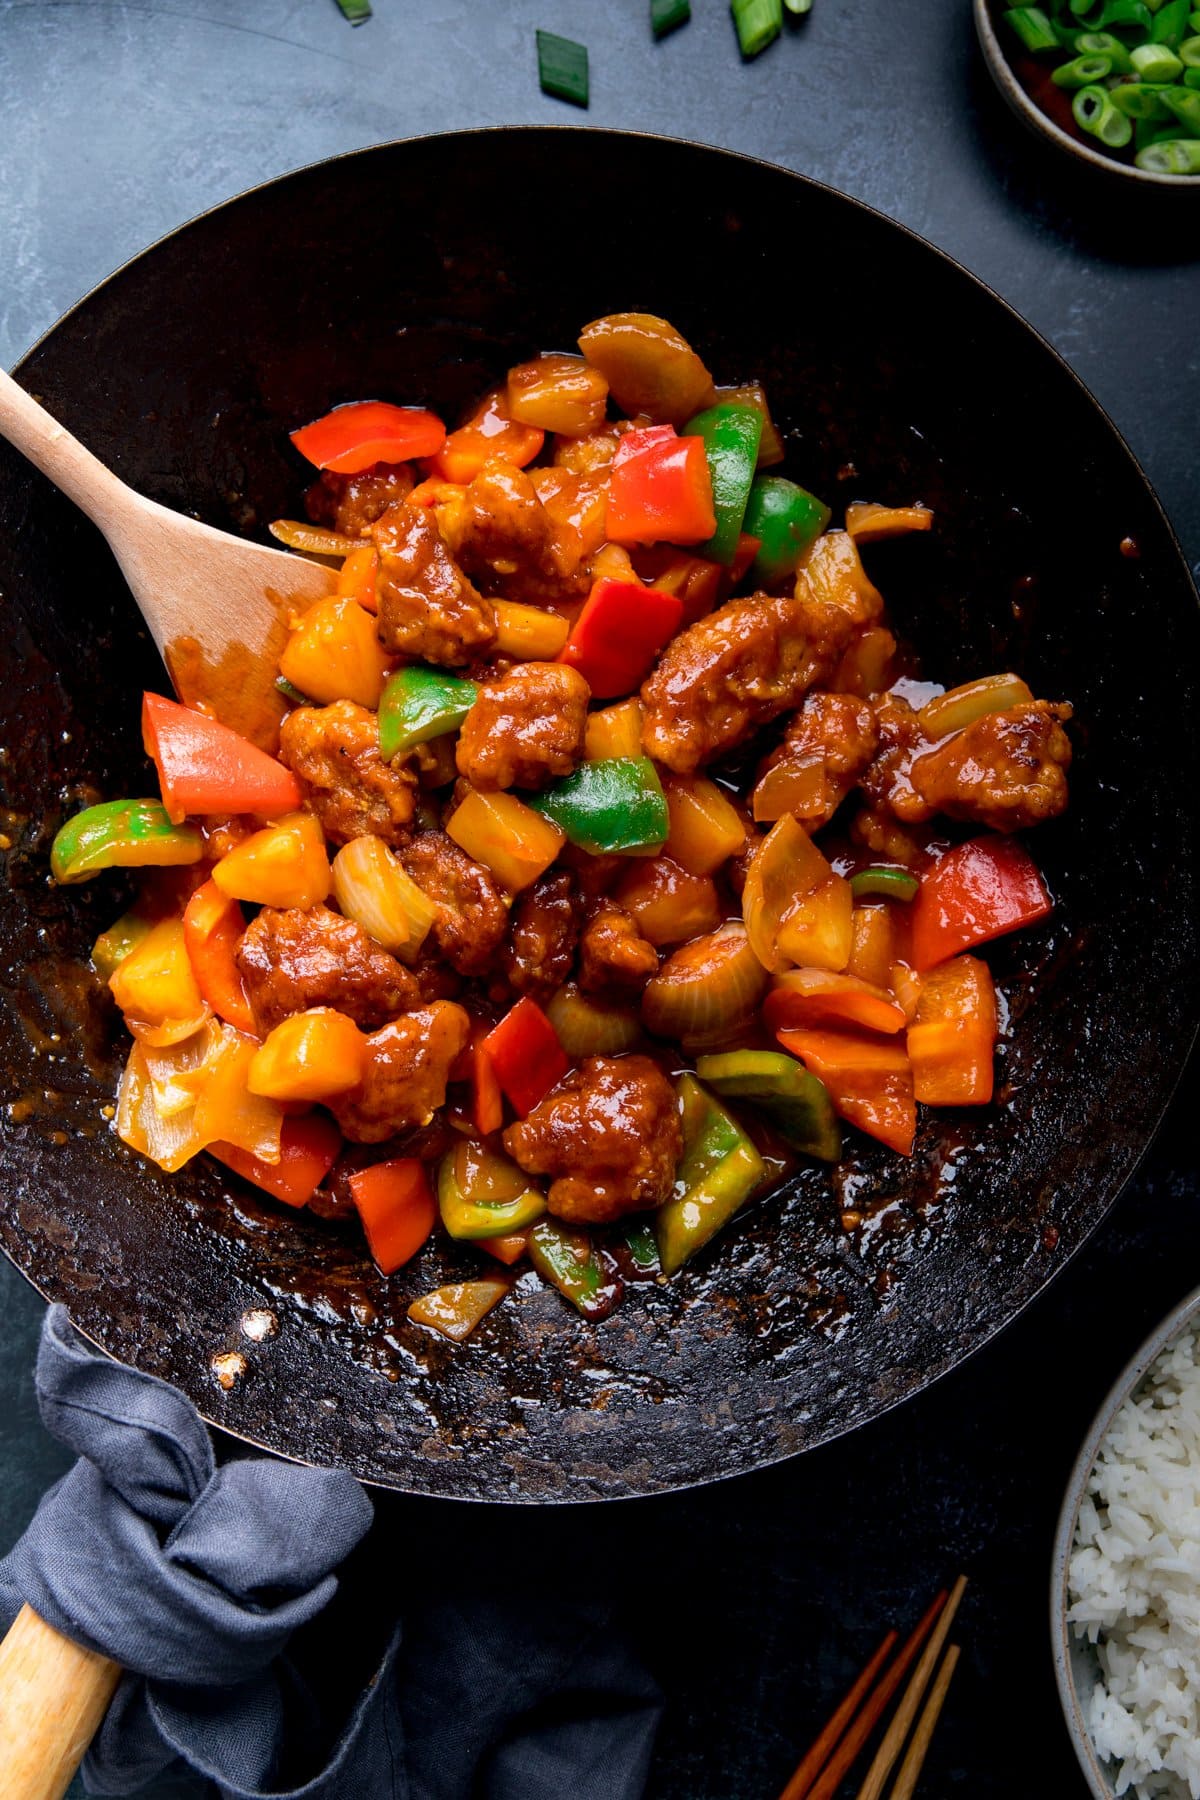 Overhead of sweet and sour pork in a wok on a blue surface